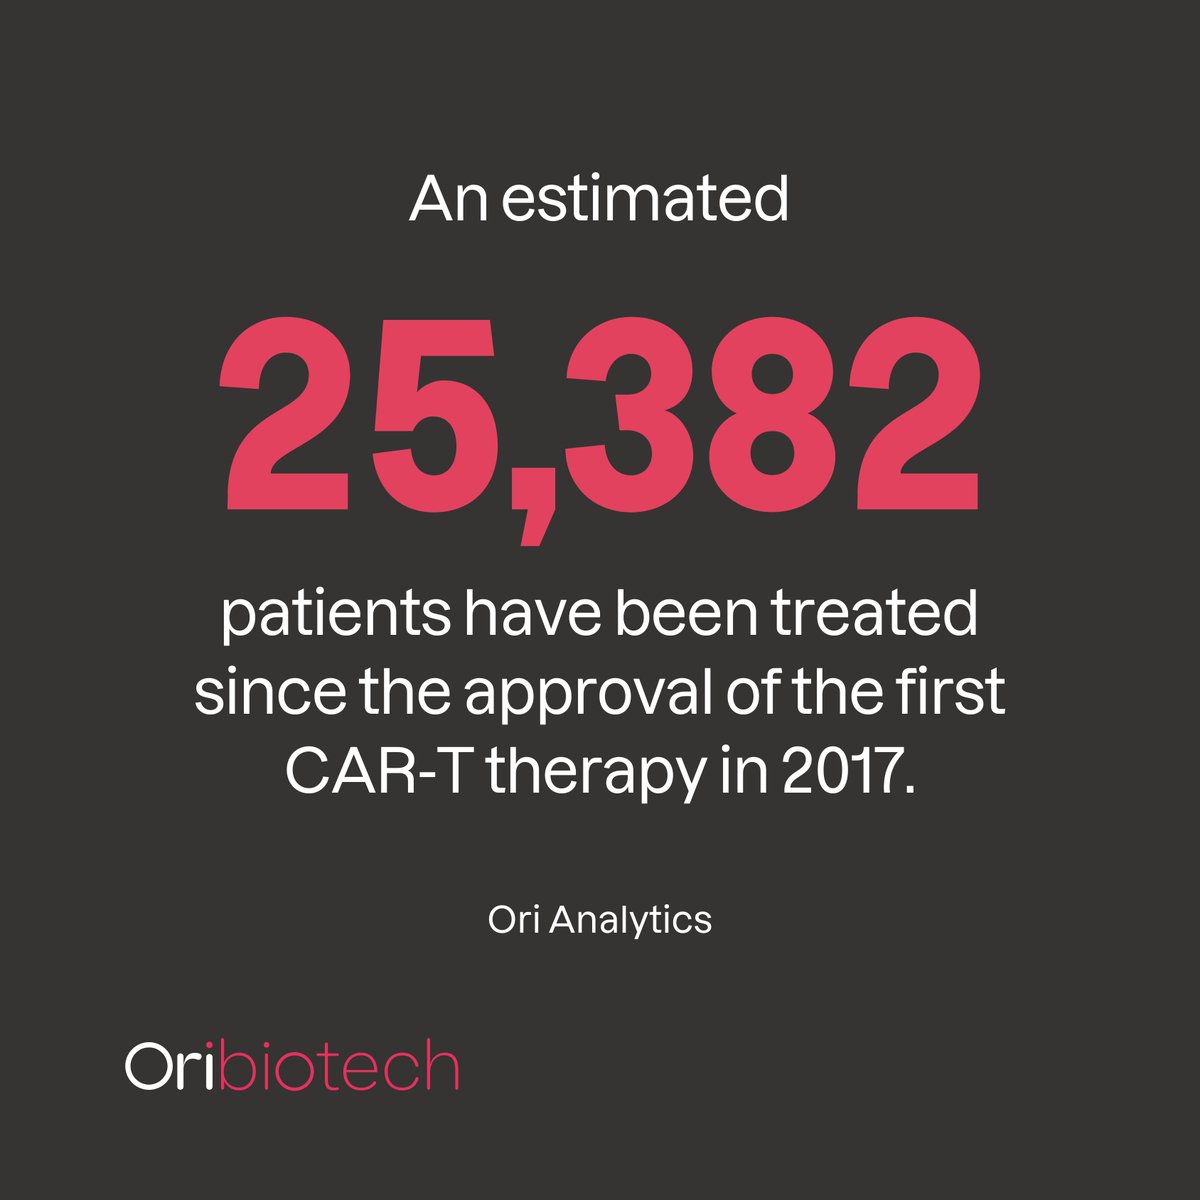 6 CGTs are on the market. Commercial challenges mean that the no. of patients who have received CGT is much lower than the no. of eligible patients. Manufacturing technologies must keep pace with scientific developments to enable #PatientAccess⬇️ oribiotech.com/patient-access…